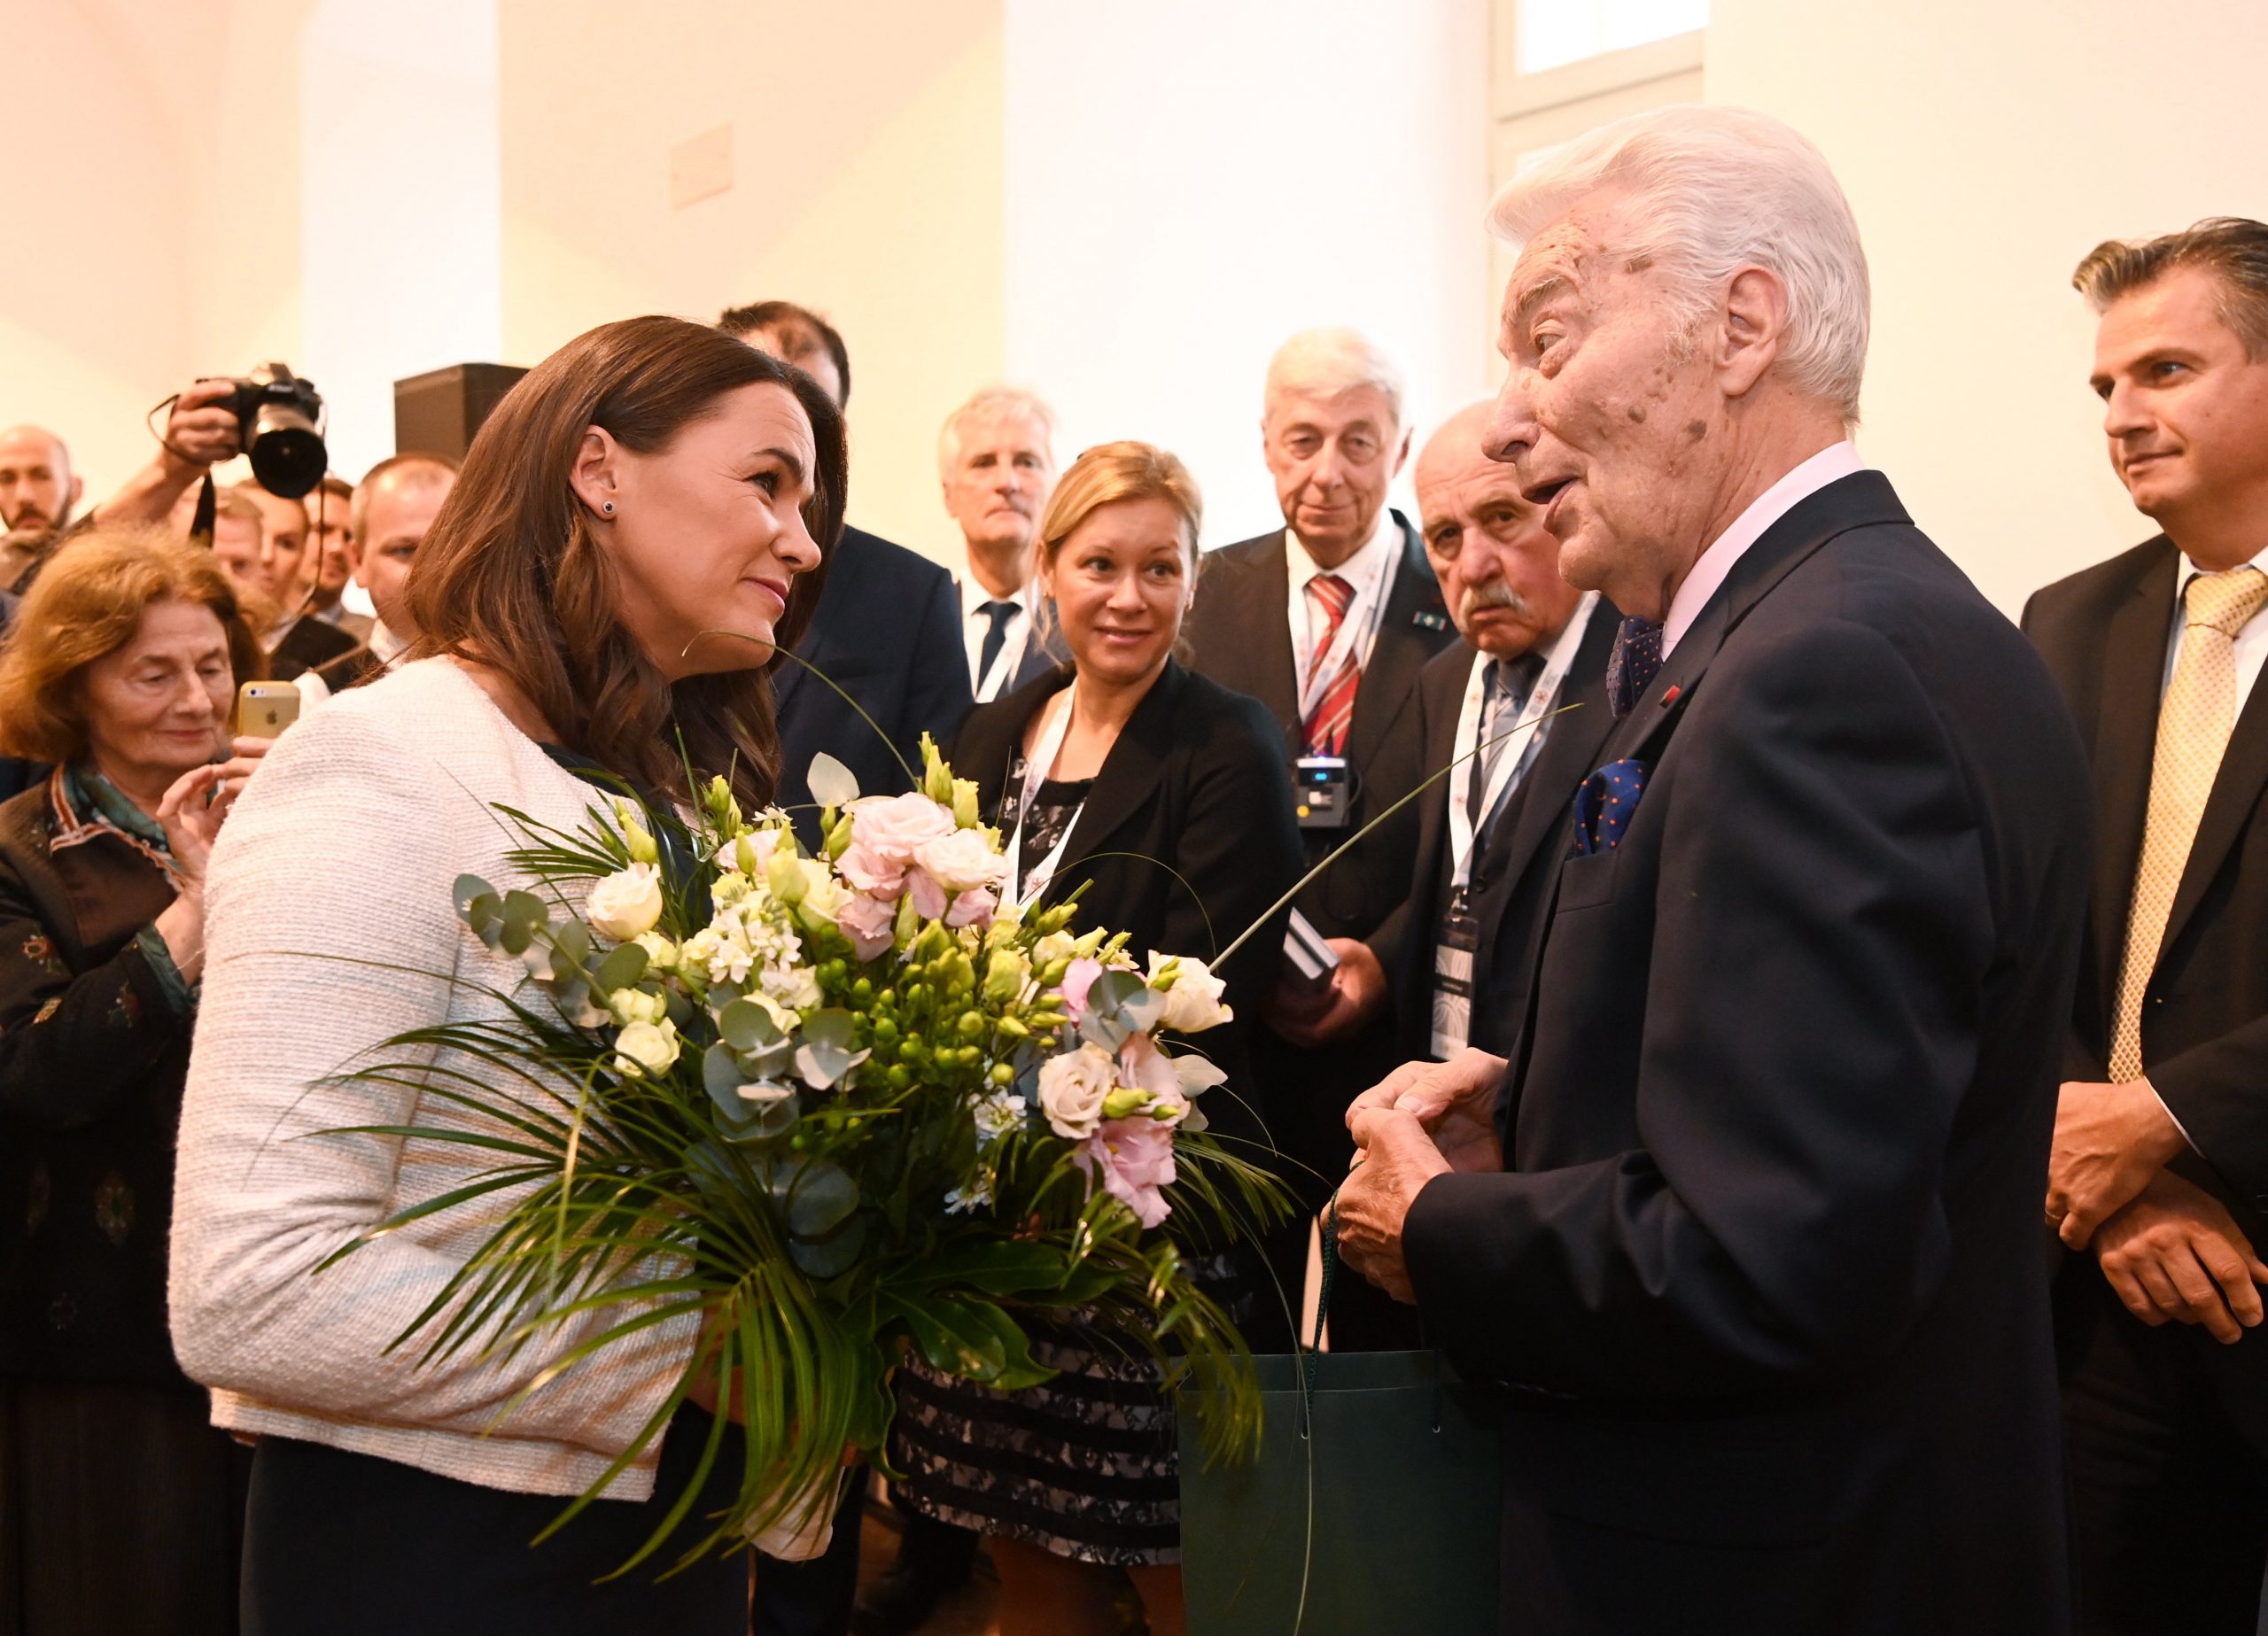 Hungarian President Welcomes Participants of the Friends of Hungary Foundation Conference